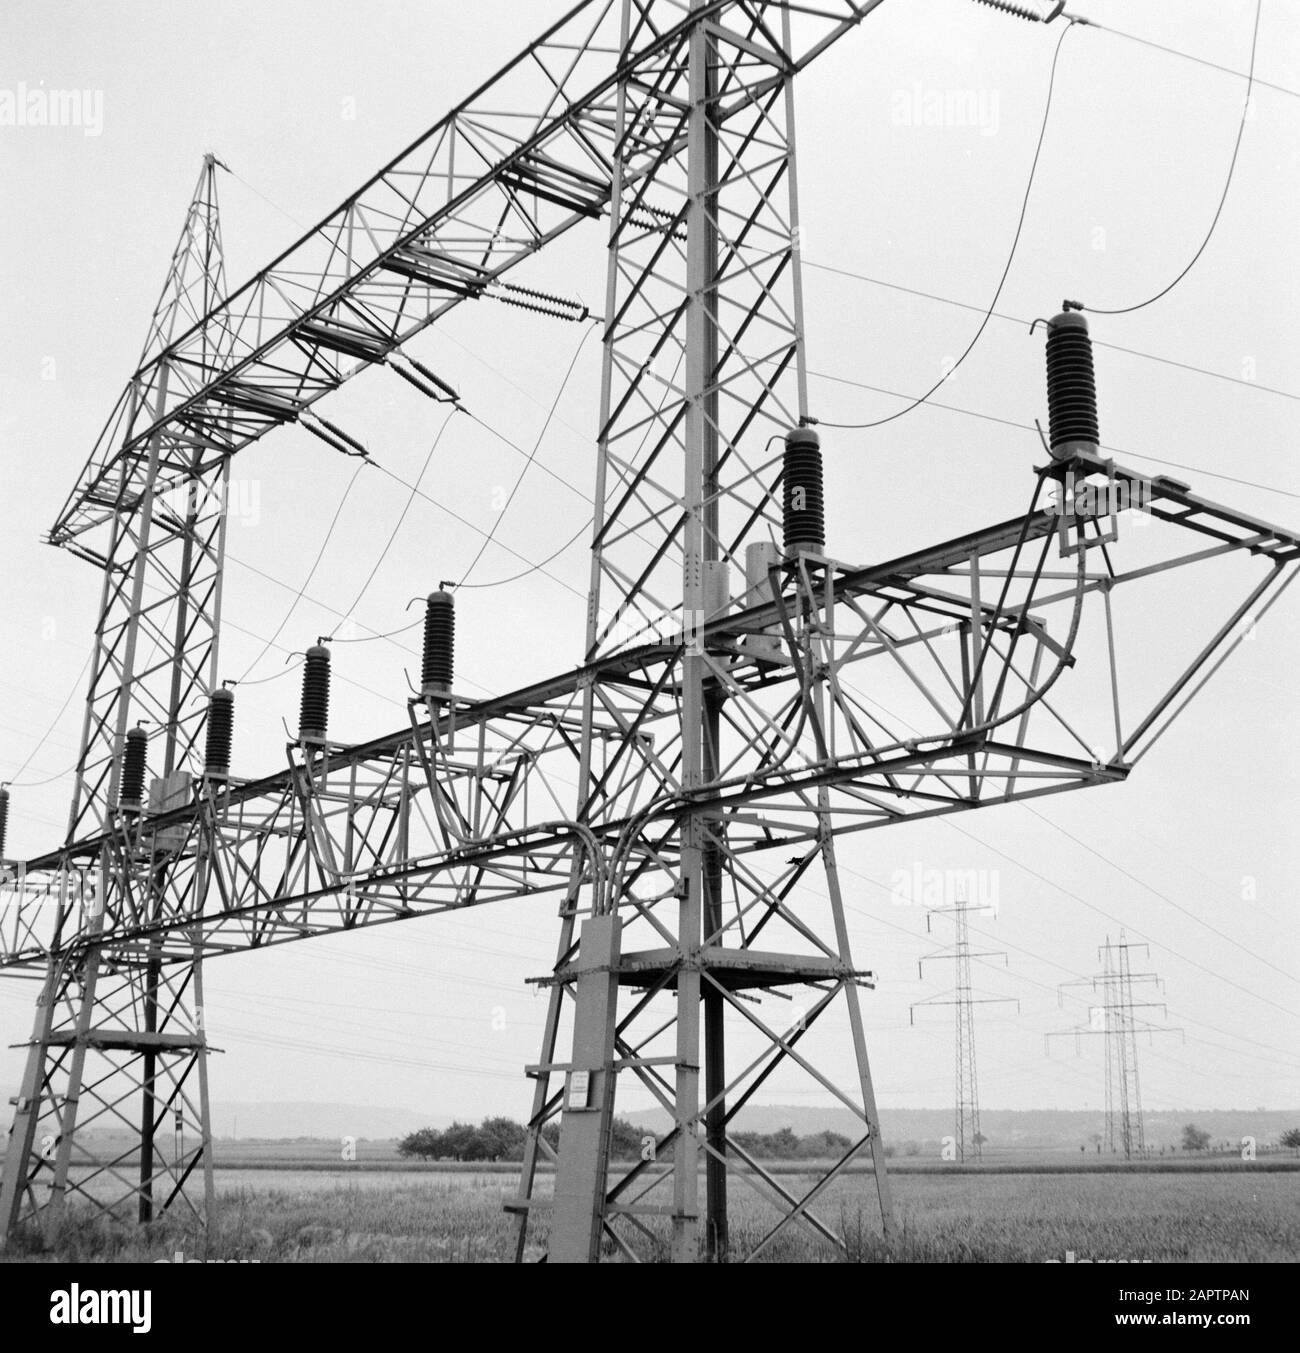 Rhine navigation, report from tug Damco 9: West Germany  High voltage mast with insulators and power lines near Koblenz Date: 1 April 1955 Location: Germany, Koblenz, West Germany Keywords: electricity, high voltage masts, landscapes Stock Photo